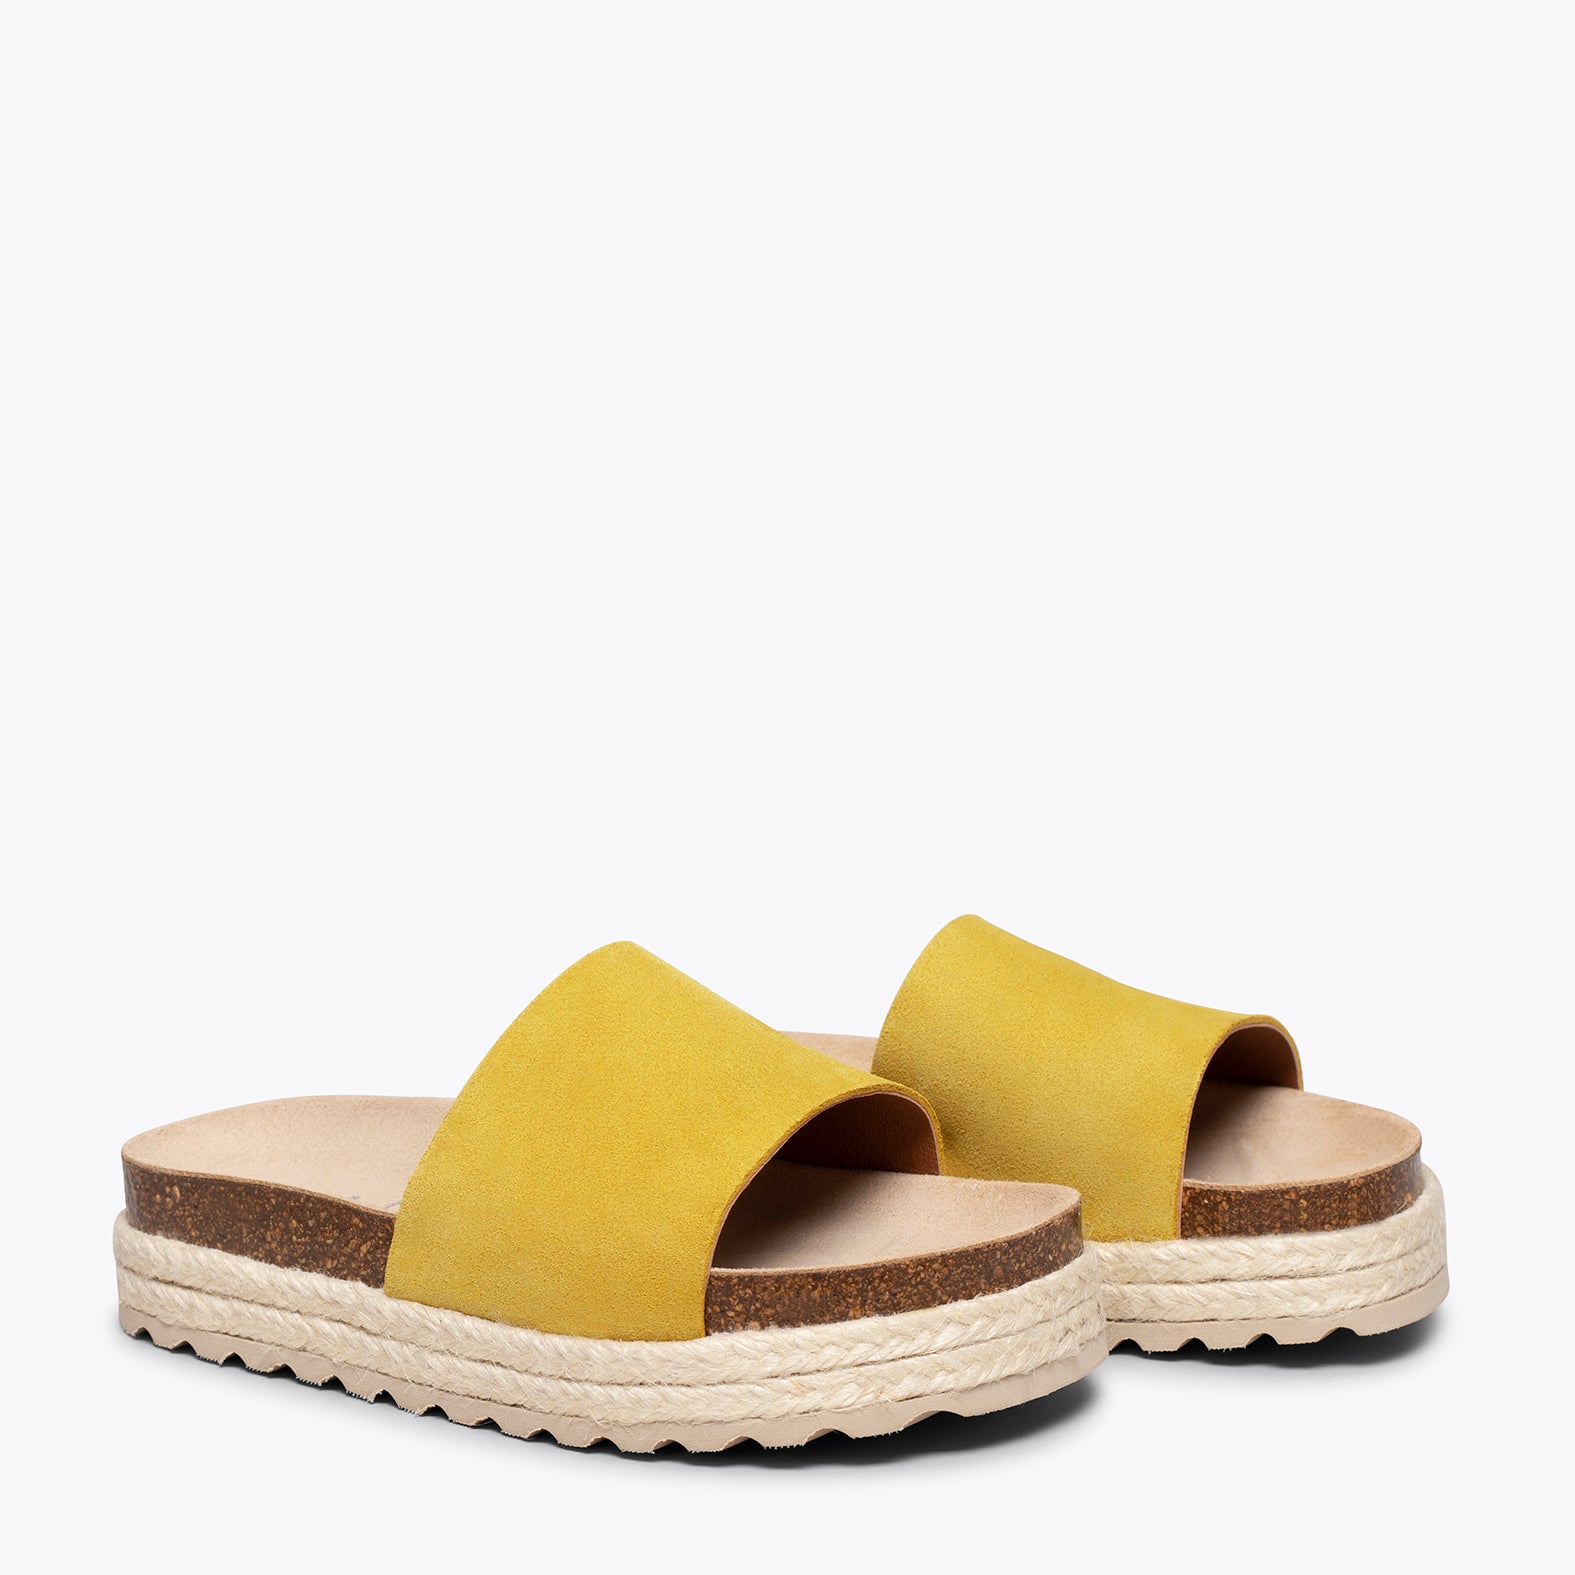 STRAWBERRY – YELLOW flat sandals for girls